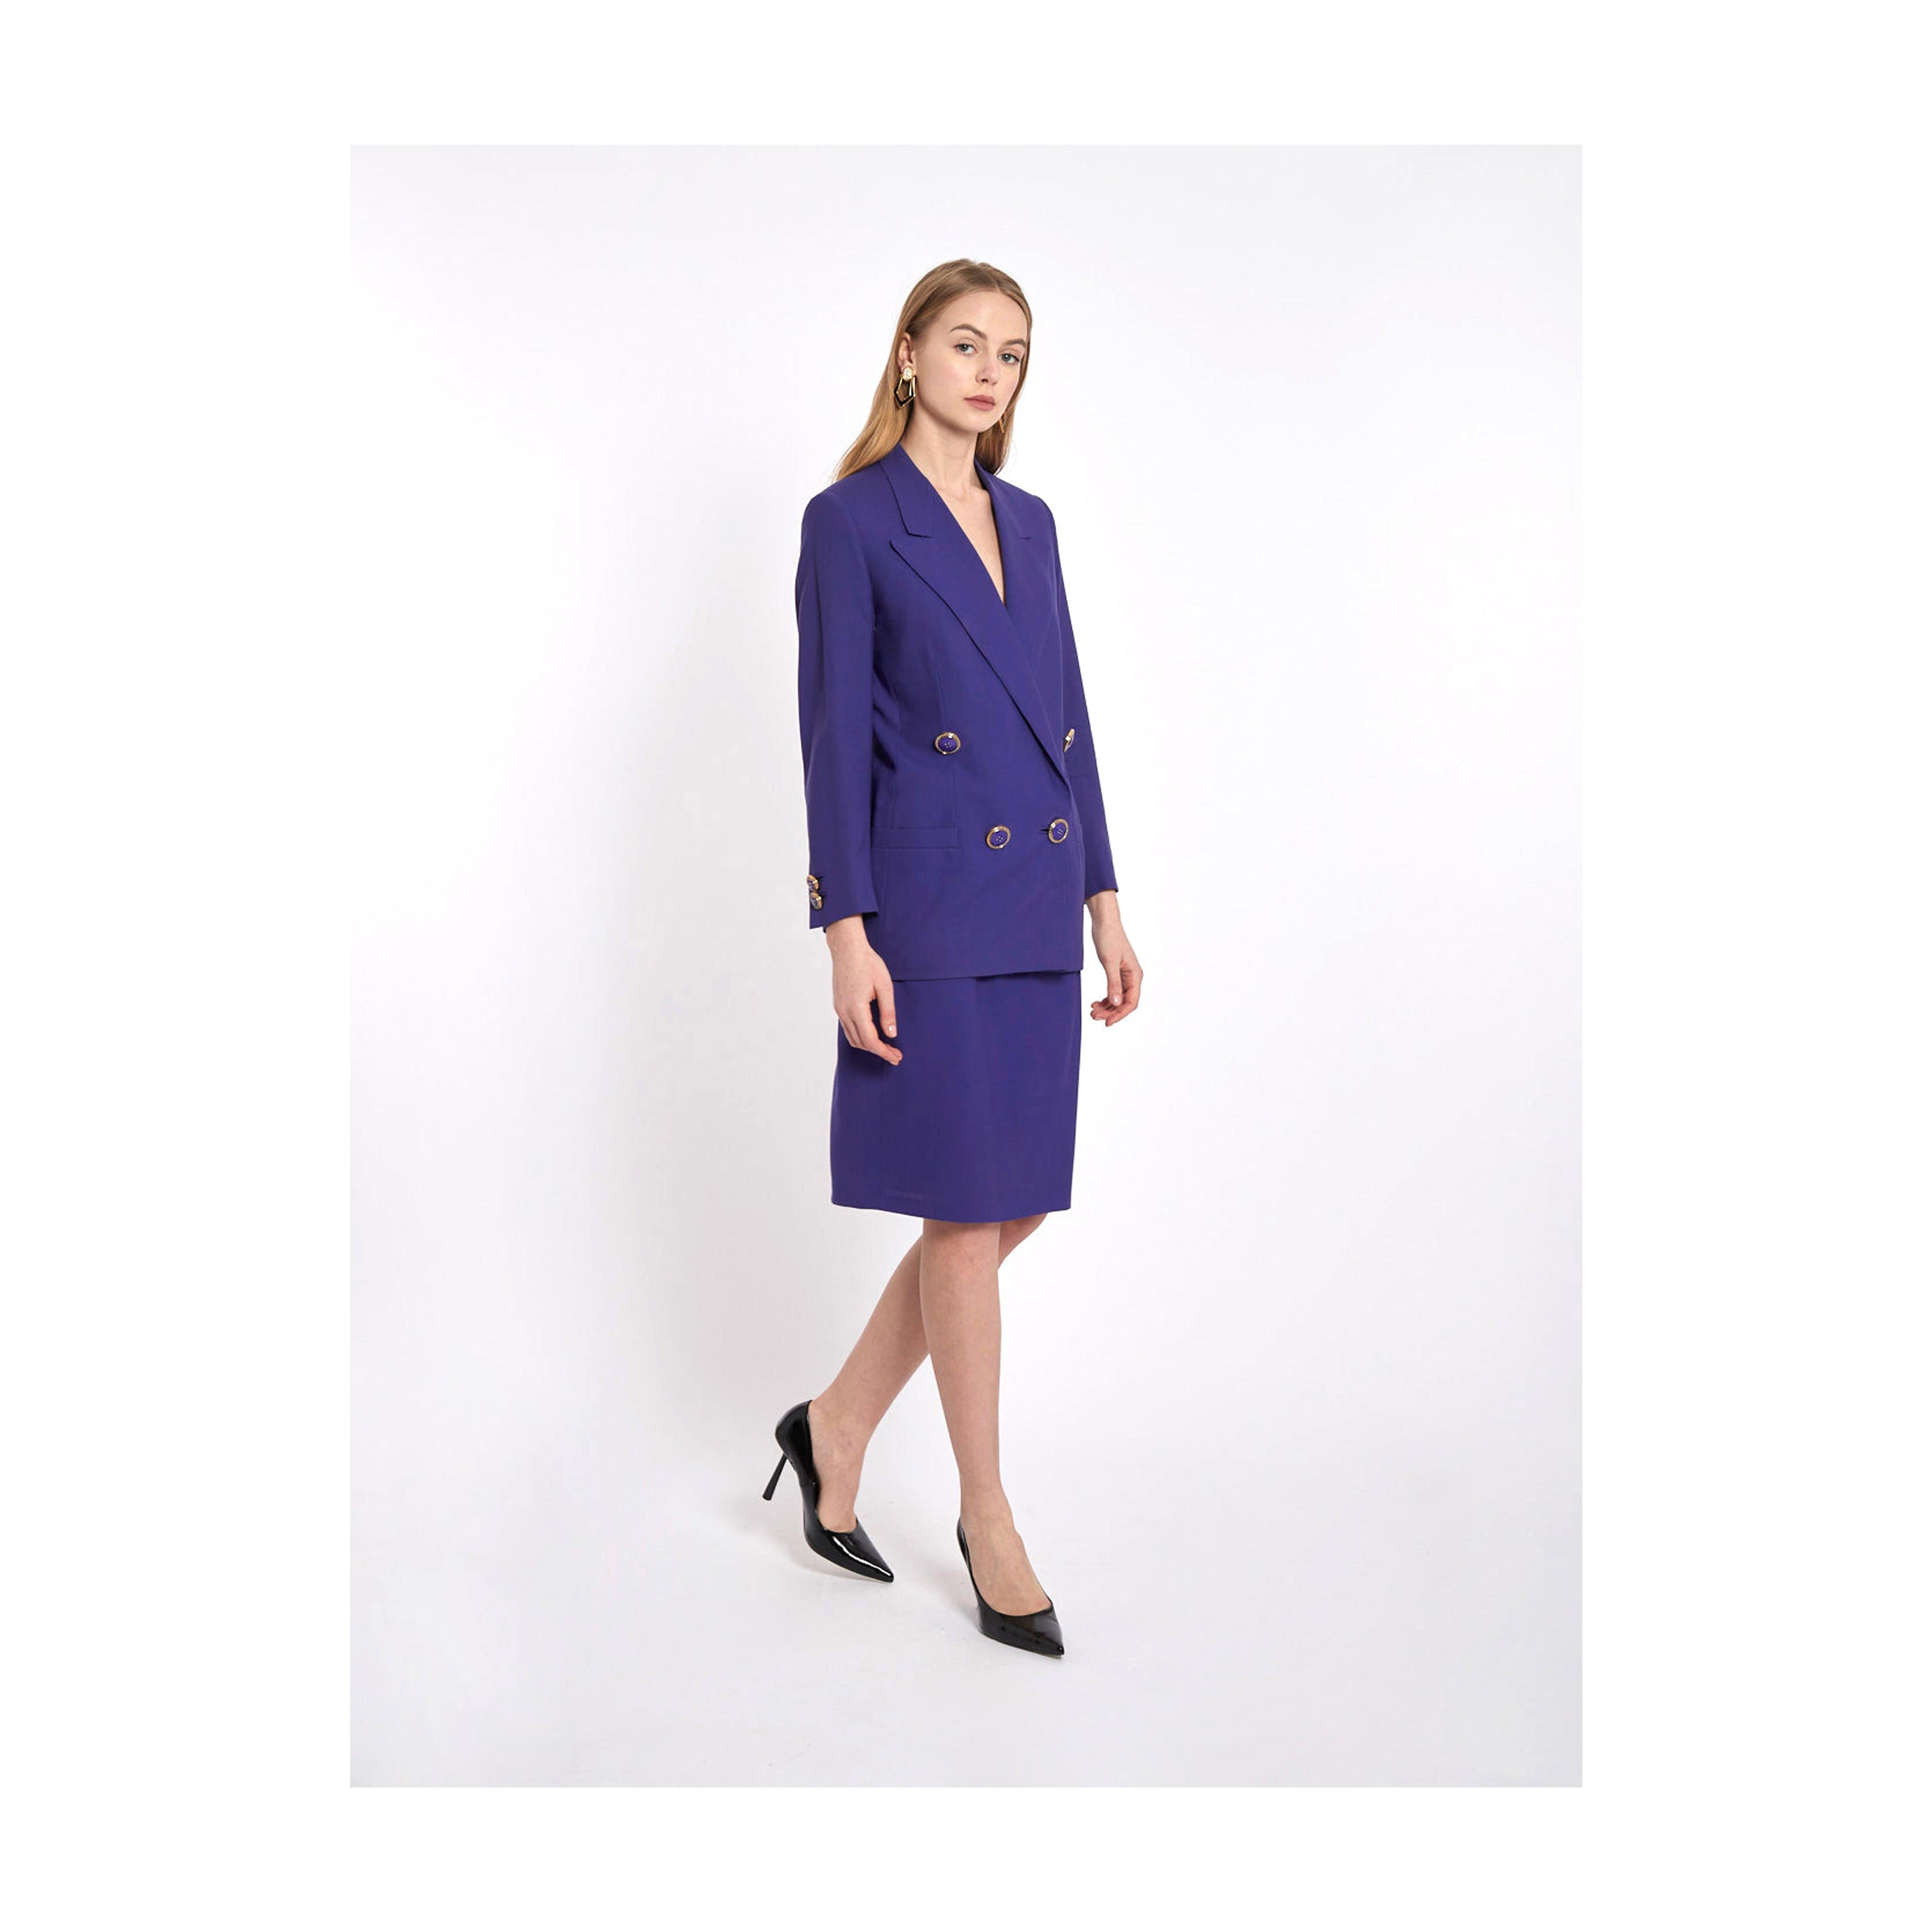 This Gianni Versace jacket and skirt suit, labelled on the front, in bright purple is pure Eighties extravagance. The double-breasted jacket has a plunging neckline and it is decorated with large golden and purple buttons on the pockets and on the